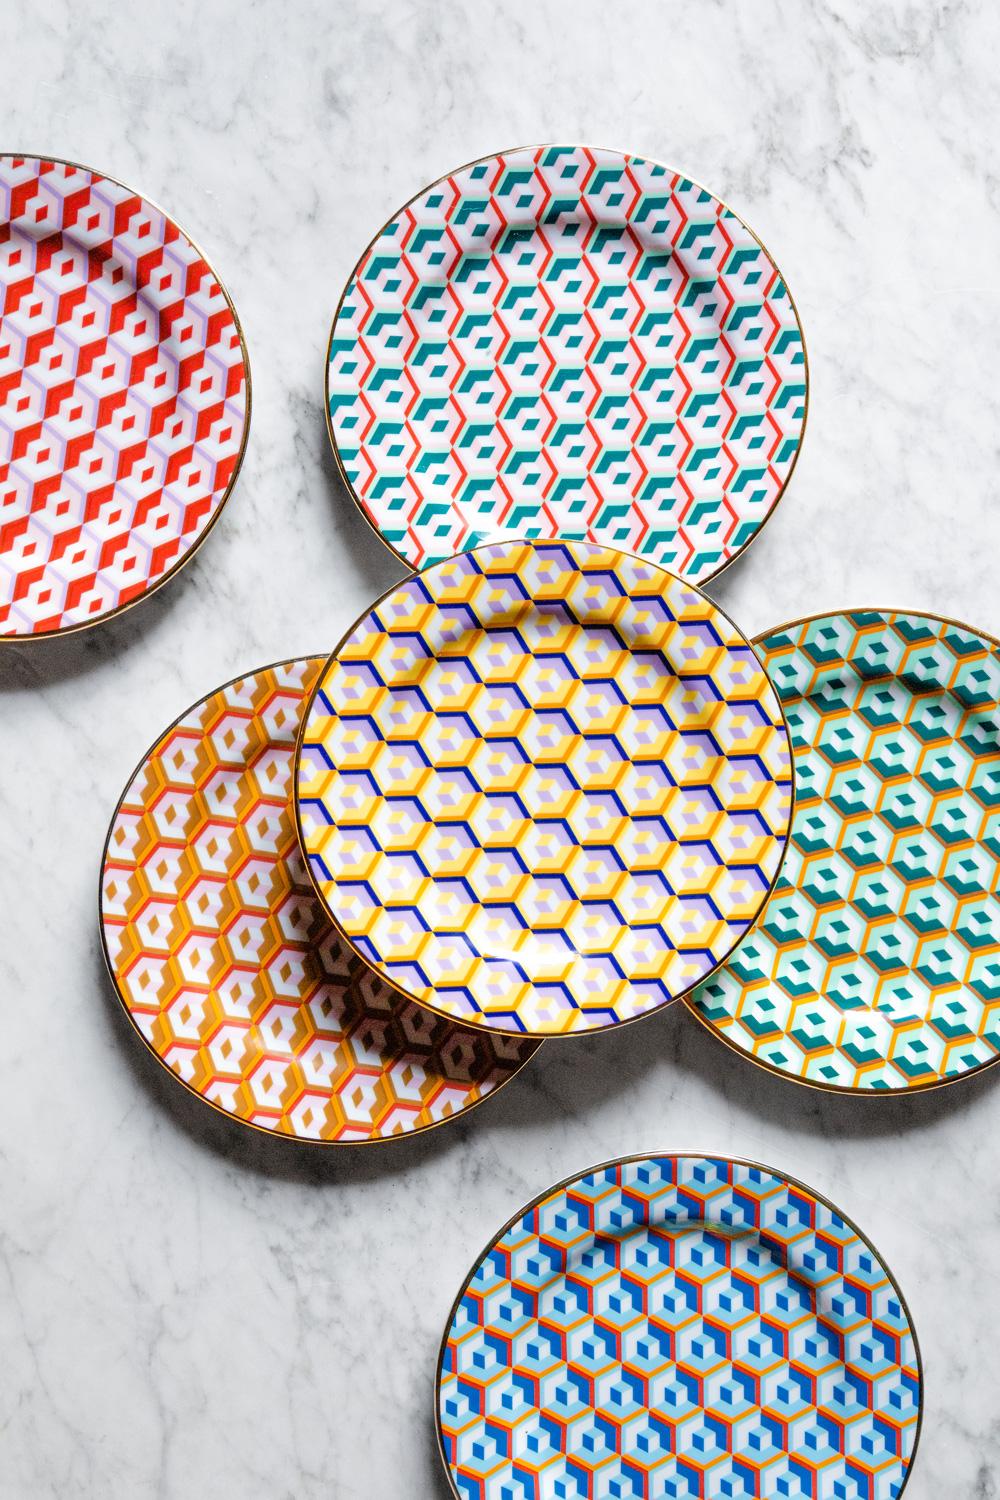 Part of our ravishingly retro collaboration with 1stDibs, this set-of-two Dessert Plates arrives in the vintage Cubi Lilla print crafted from fine porcelain by our historic Italian partners, Ancap. The 1stDibs collection offers six different color